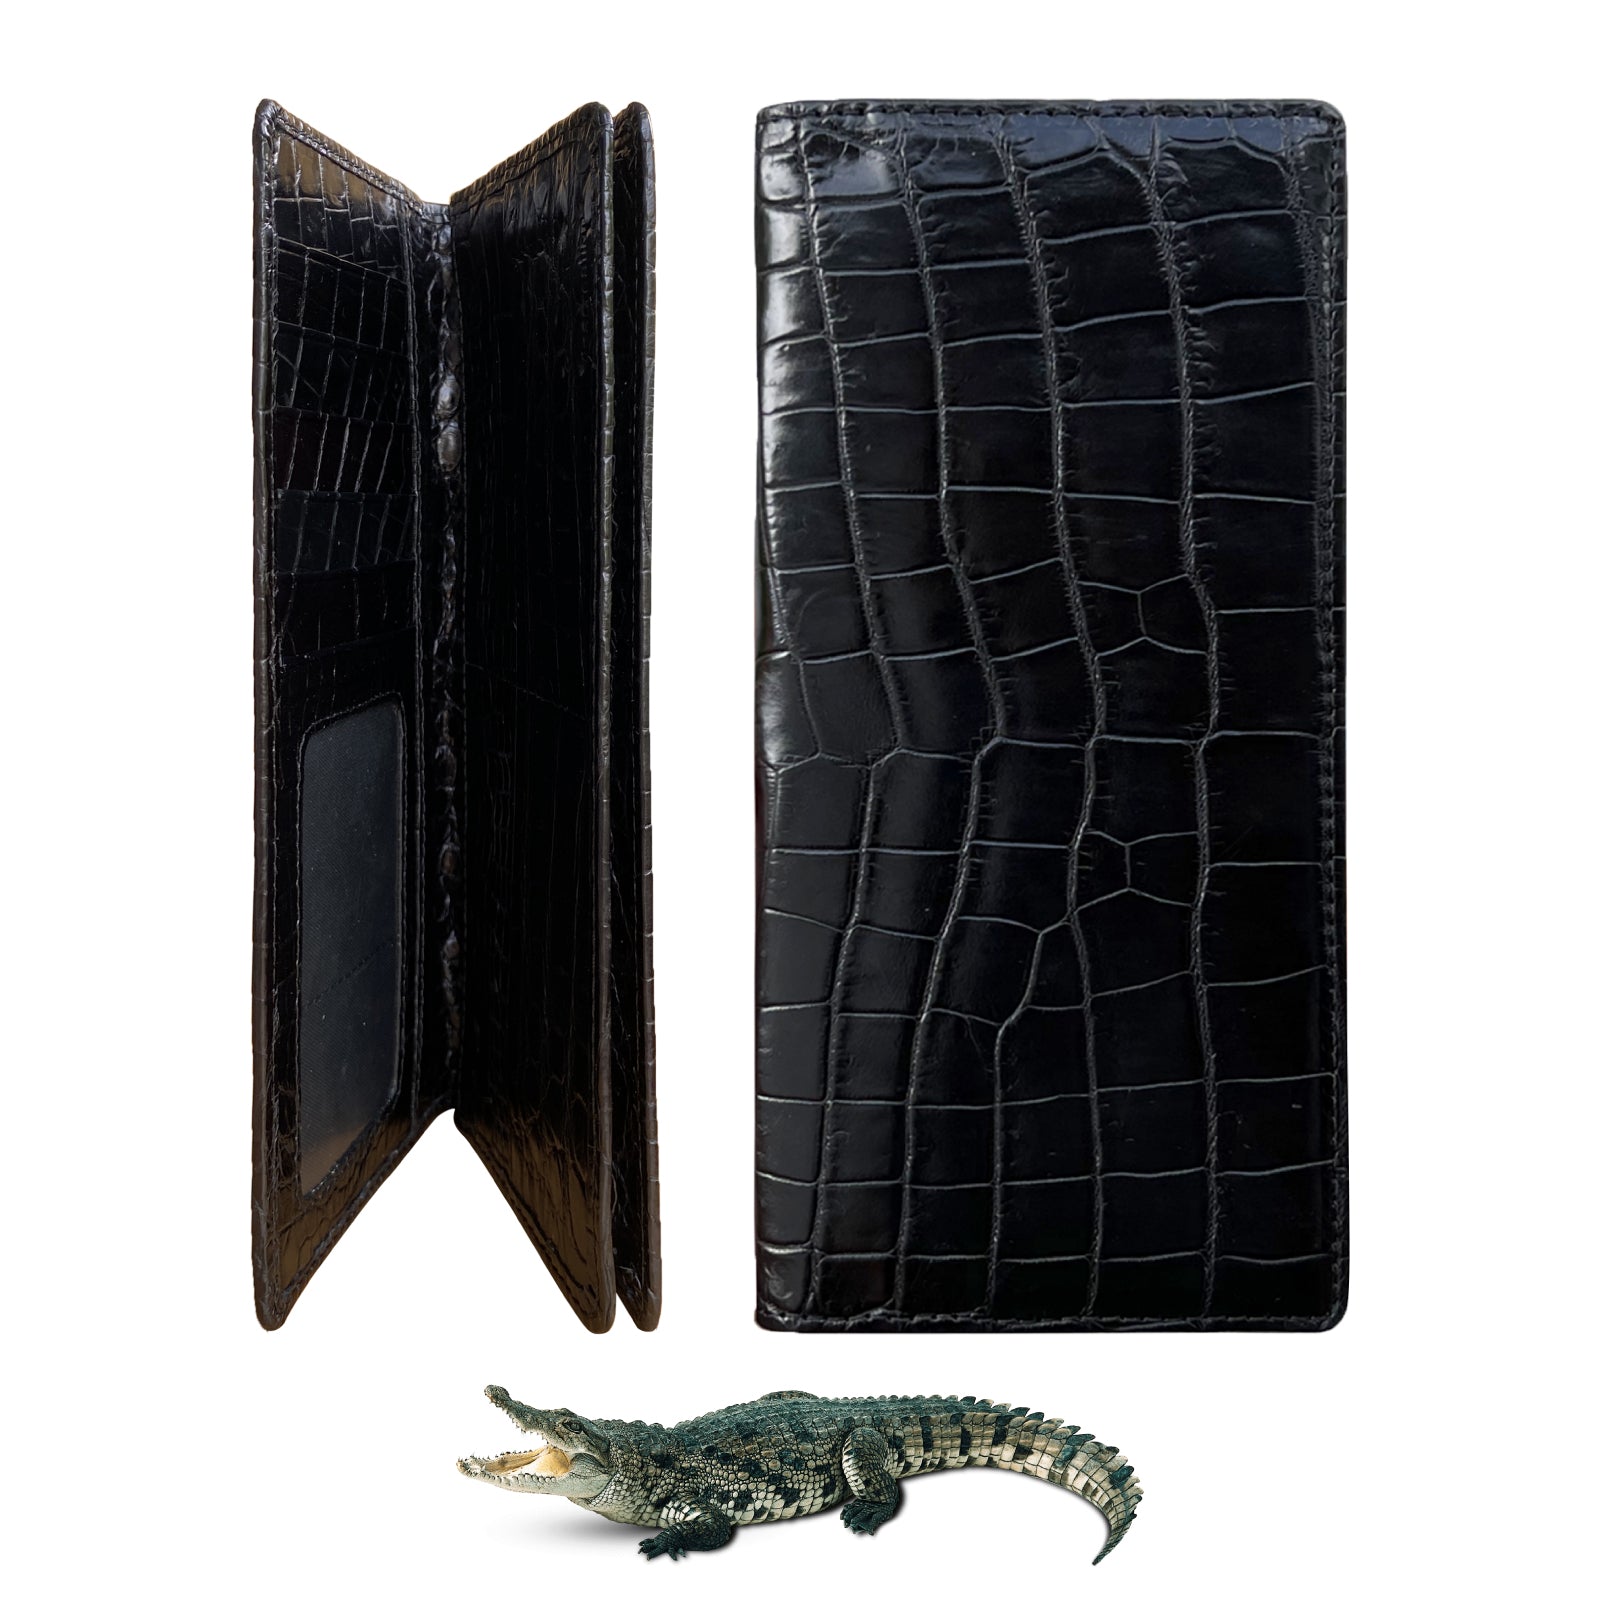 A better pic of the alligator wallet from my last post! Feel great